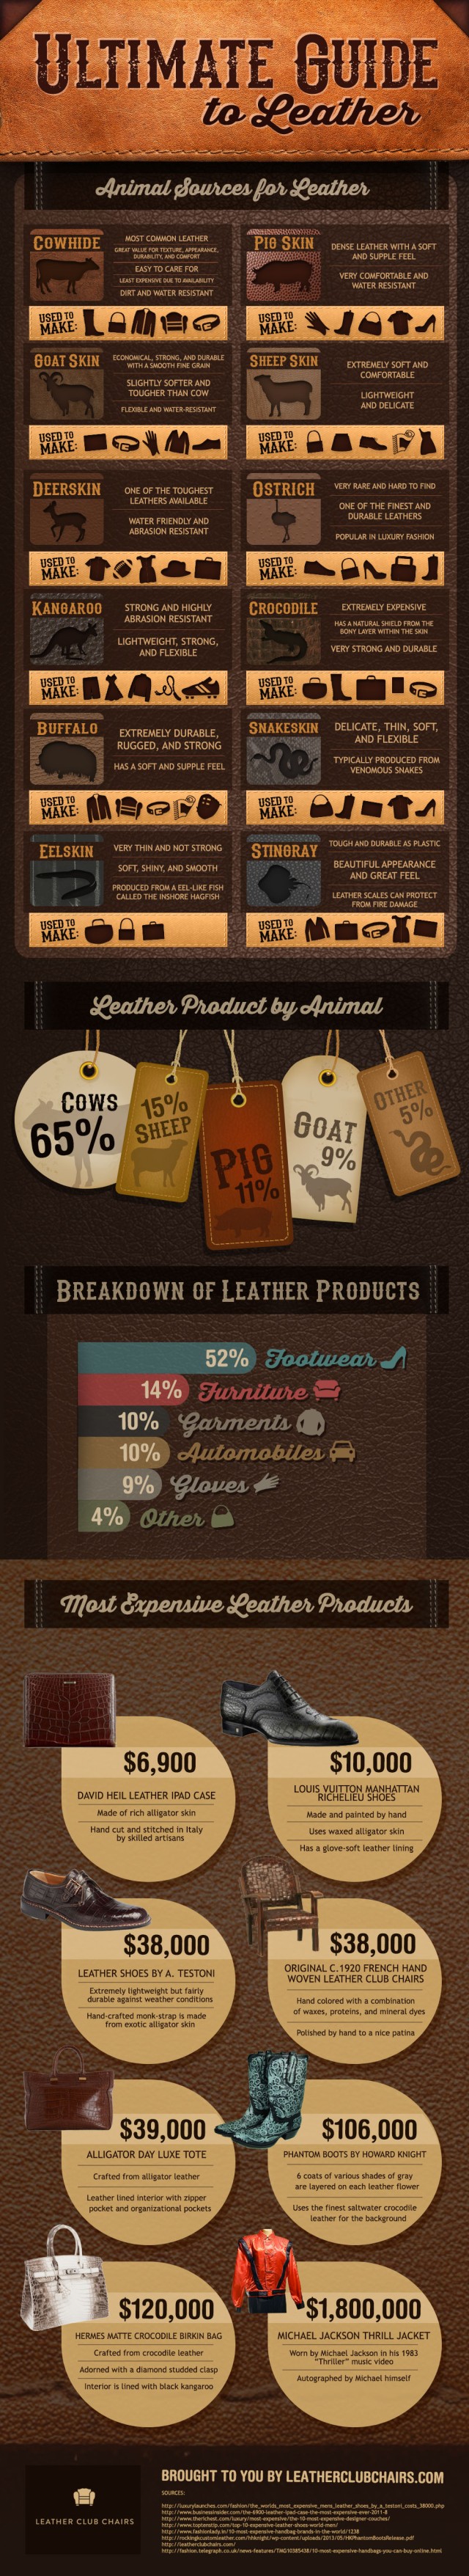 Ultimate Guide To Leather Infographic